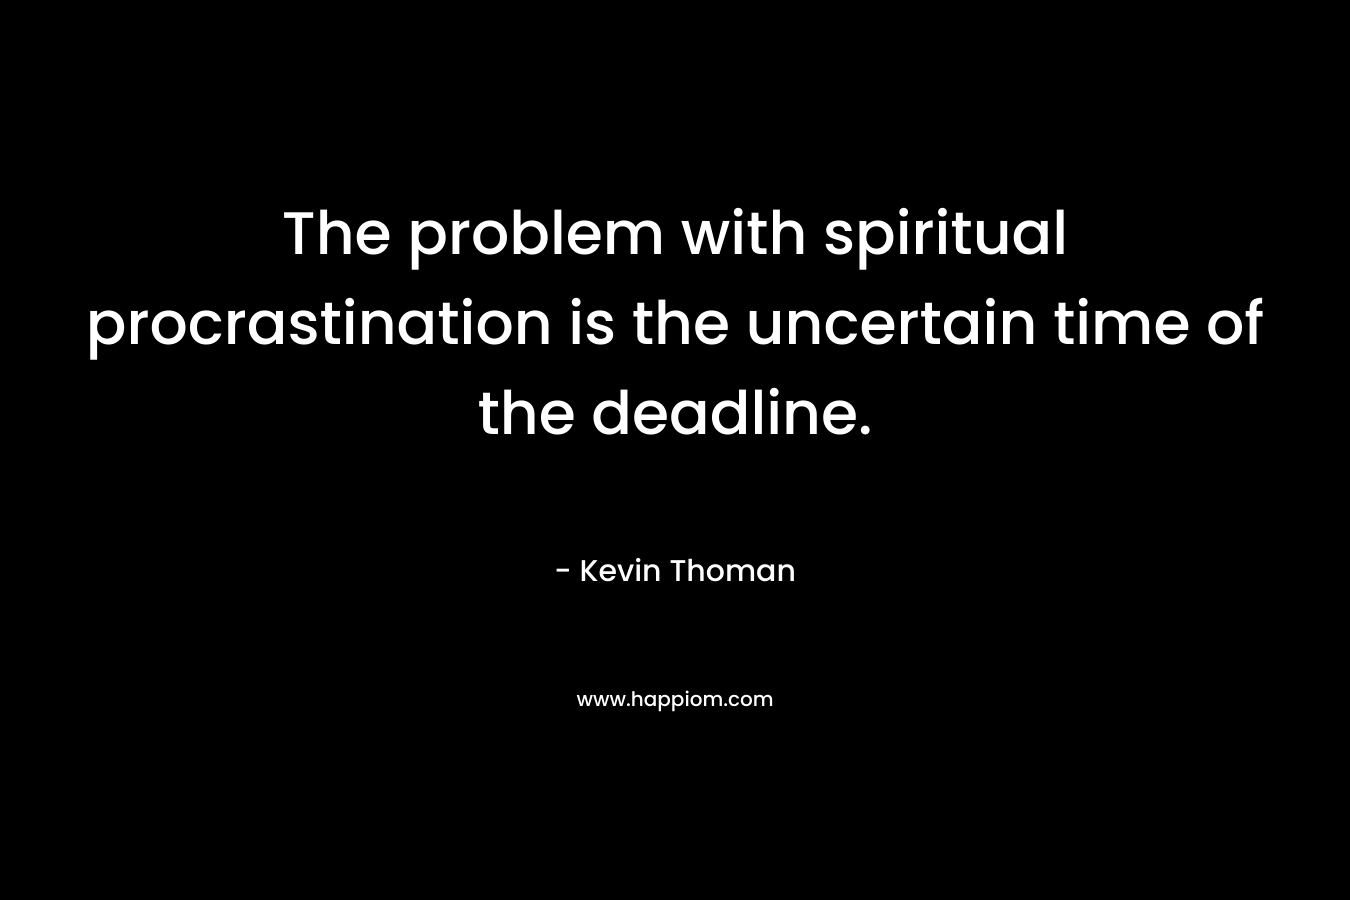 The problem with spiritual procrastination is the uncertain time of the deadline. – Kevin Thoman